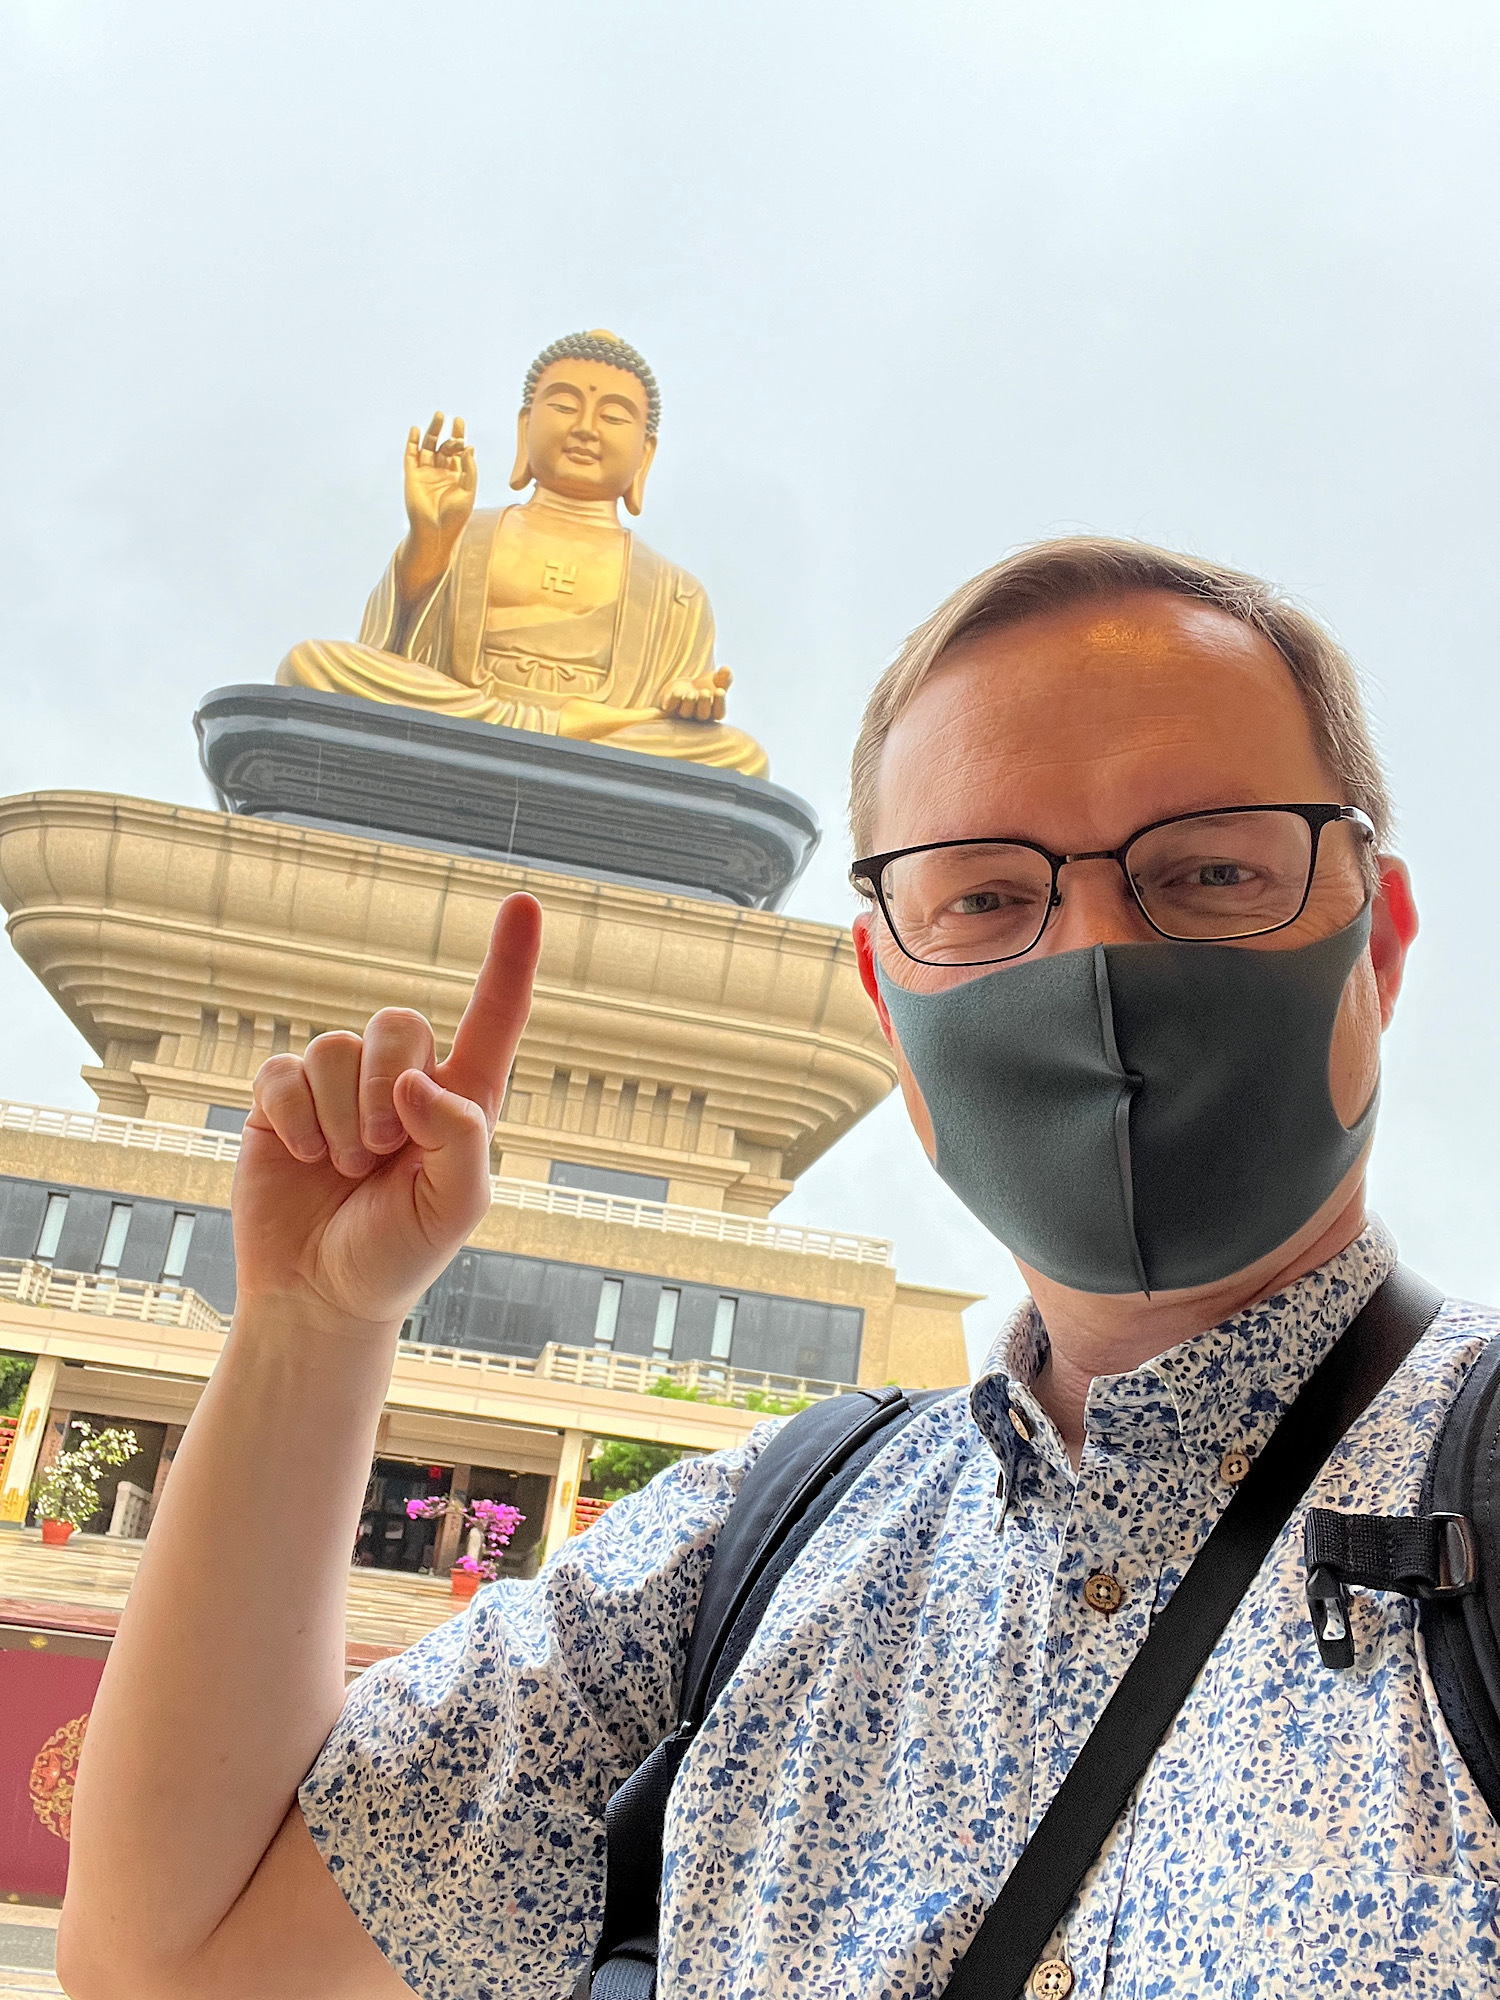 Chad selfie pointing at the Buddha statue from much closer